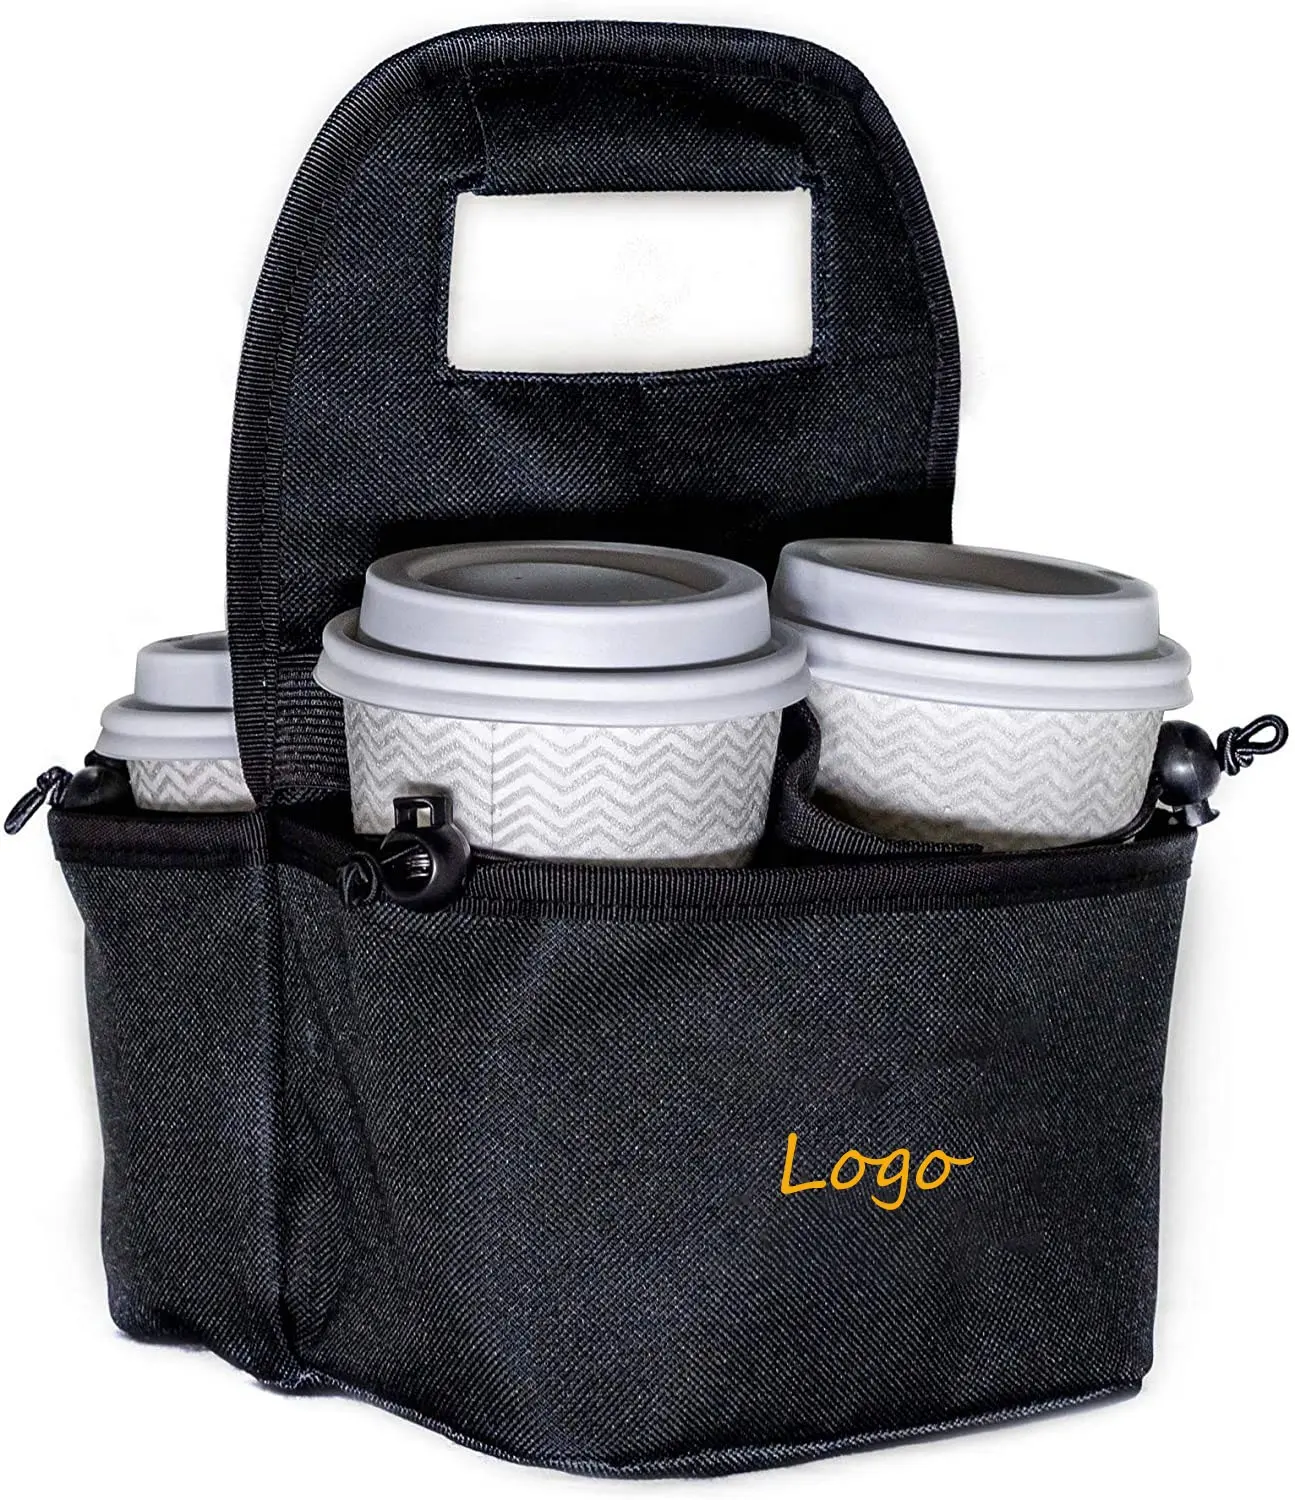 Portable Drink Carrier and Reusable Coffee Cup Holder 4 Cup Collapsible Tote Bag with Organizer Pockets Safely Secures Hot Cold